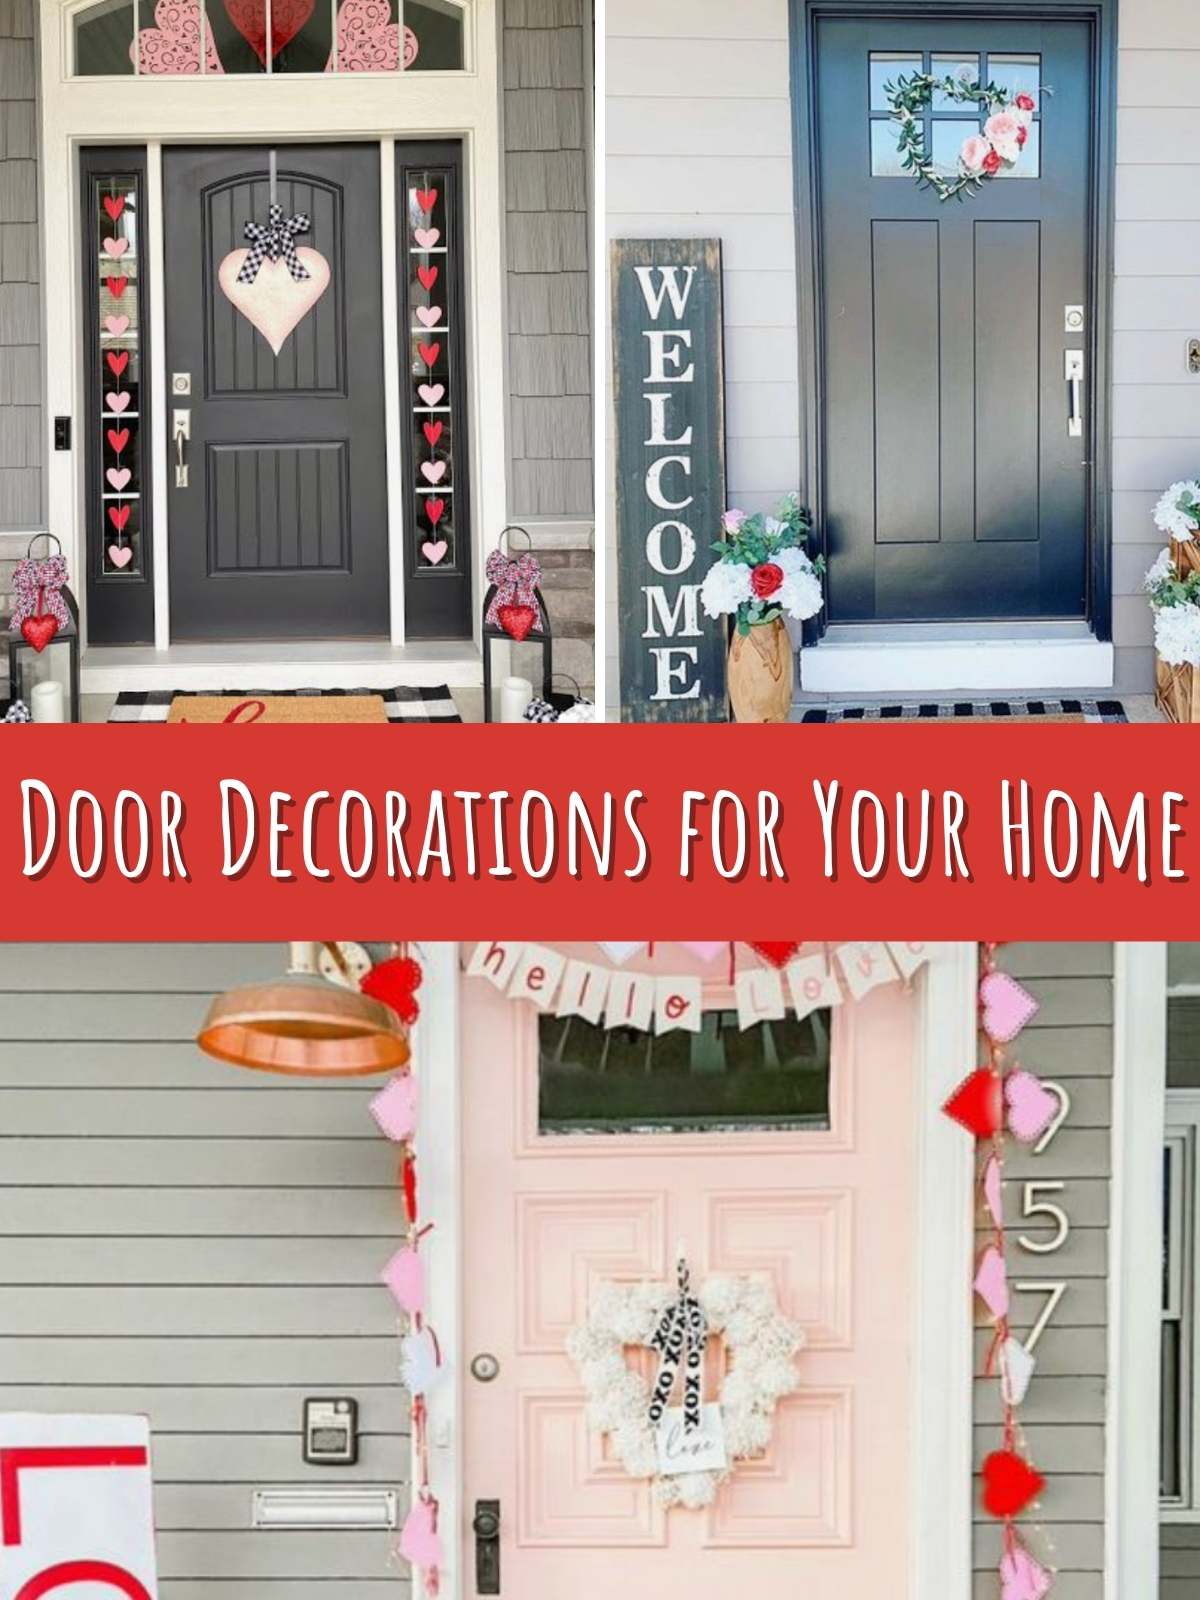 Door decorations for your home. 3 different Valentines decorations for your home.